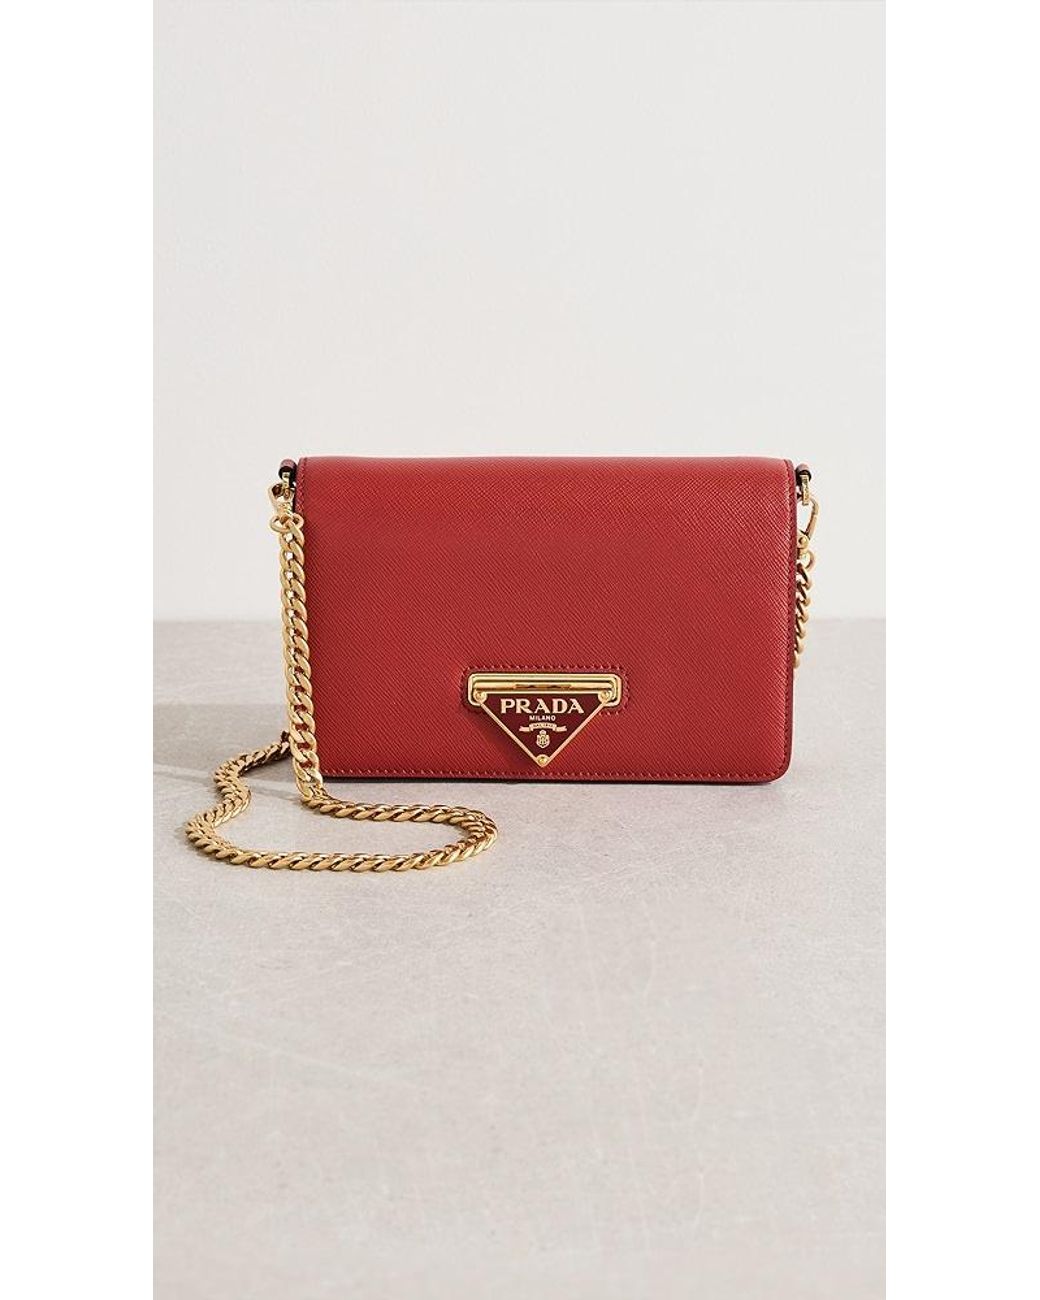 Prada Cowhide Chain Crossbody Bag Blue in Leather with Gold-tone - US